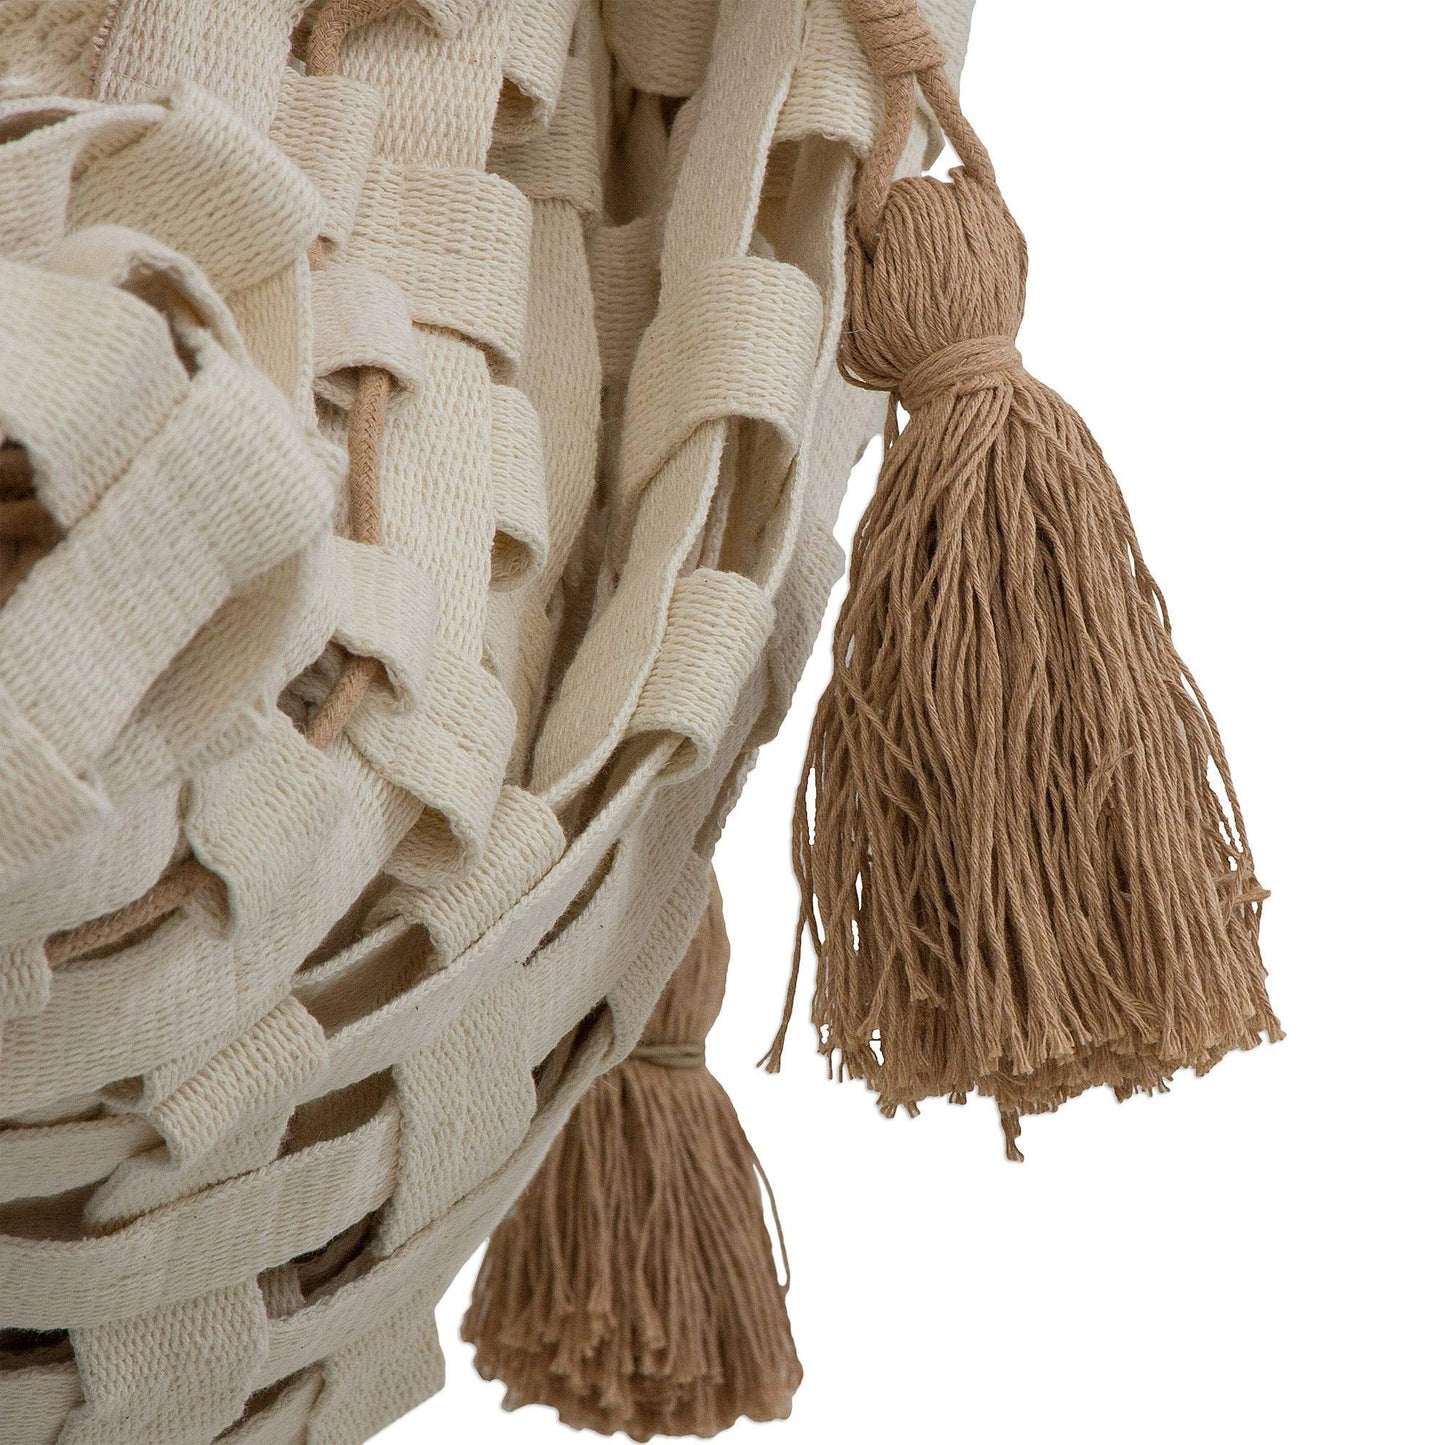 Brown and Ivory Hand Woven Cotton Rope Hammock - NOVICA